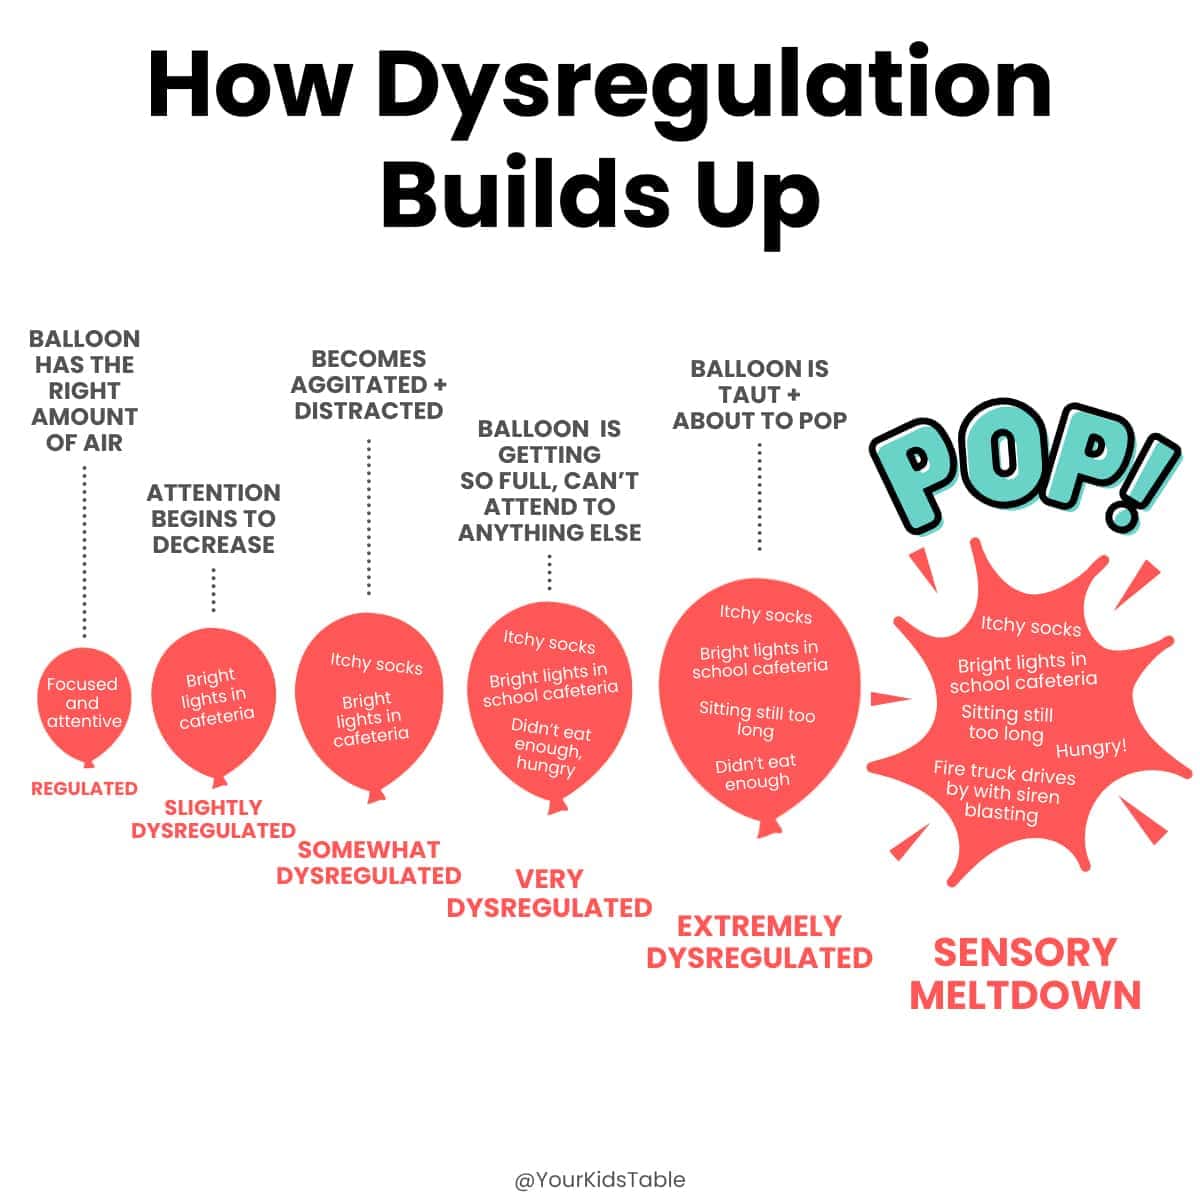 Learn what it looks like for your child to be in sensory dysregulation and how to help them get out of it and prevent it in the future.